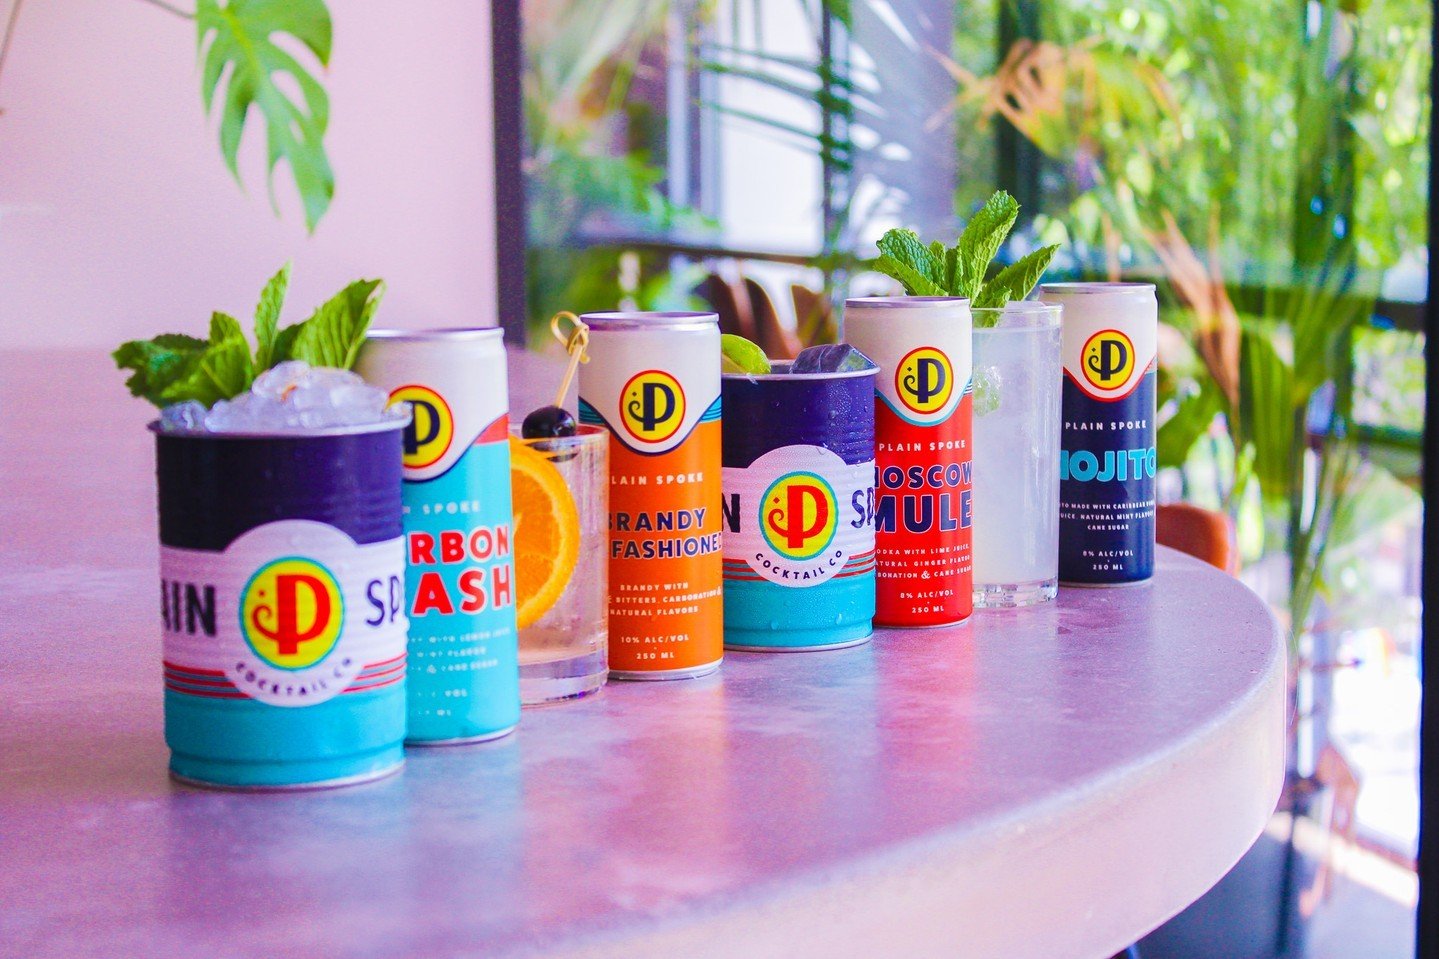 What better way to start your weekend EARLY than to sample and stock up on our canned cocktails?!?⠀
⠀
Join us at our two sampling events this week: ⠀
⠀
🗓️ May 2nd at Total Wine  in Madison from 1-3 PM⠀
🗓️ May 3rd at Waterford Waterford Wine &amp; S